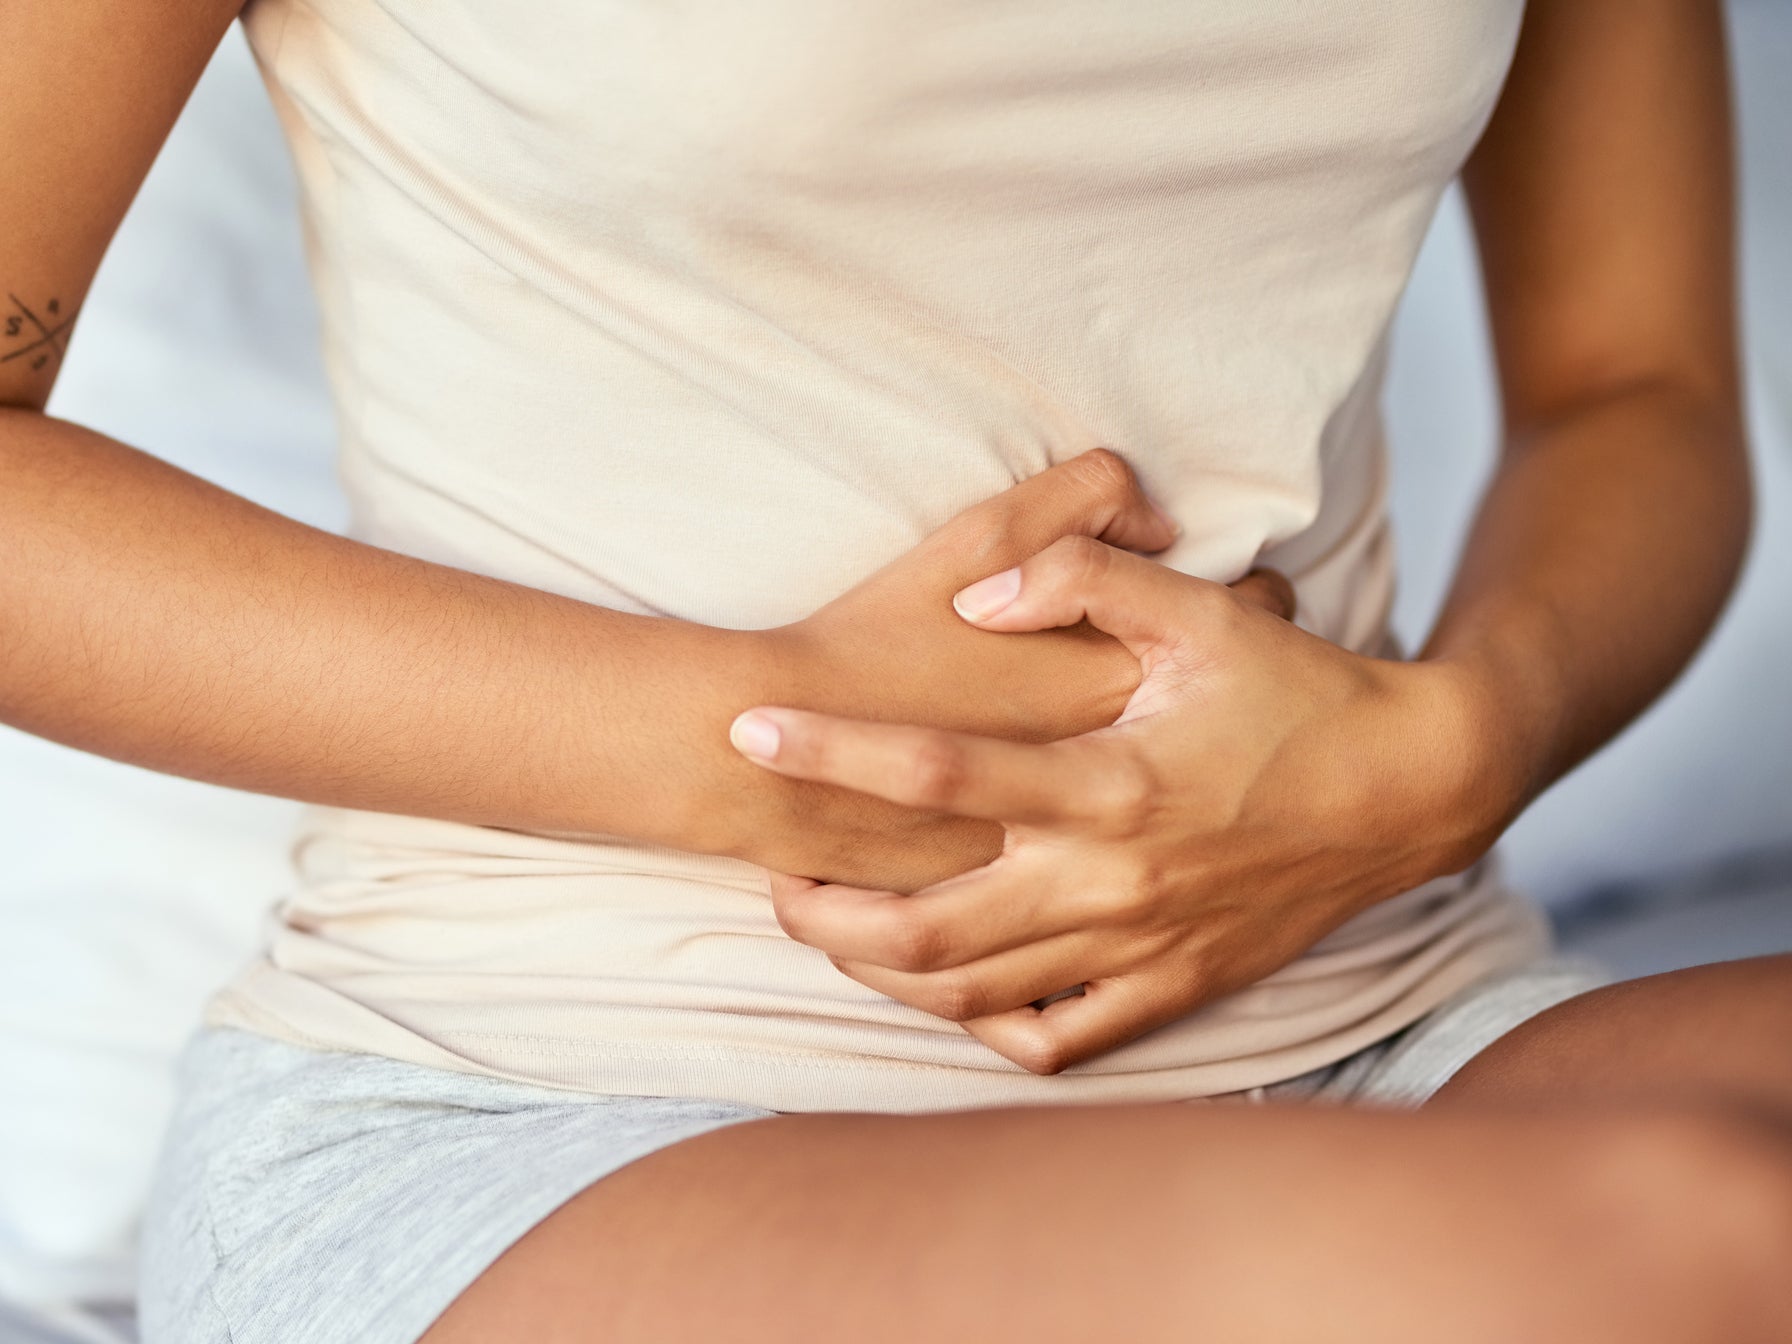 Rectovaginal endometriosis is a severe form of this common gynaecological condition